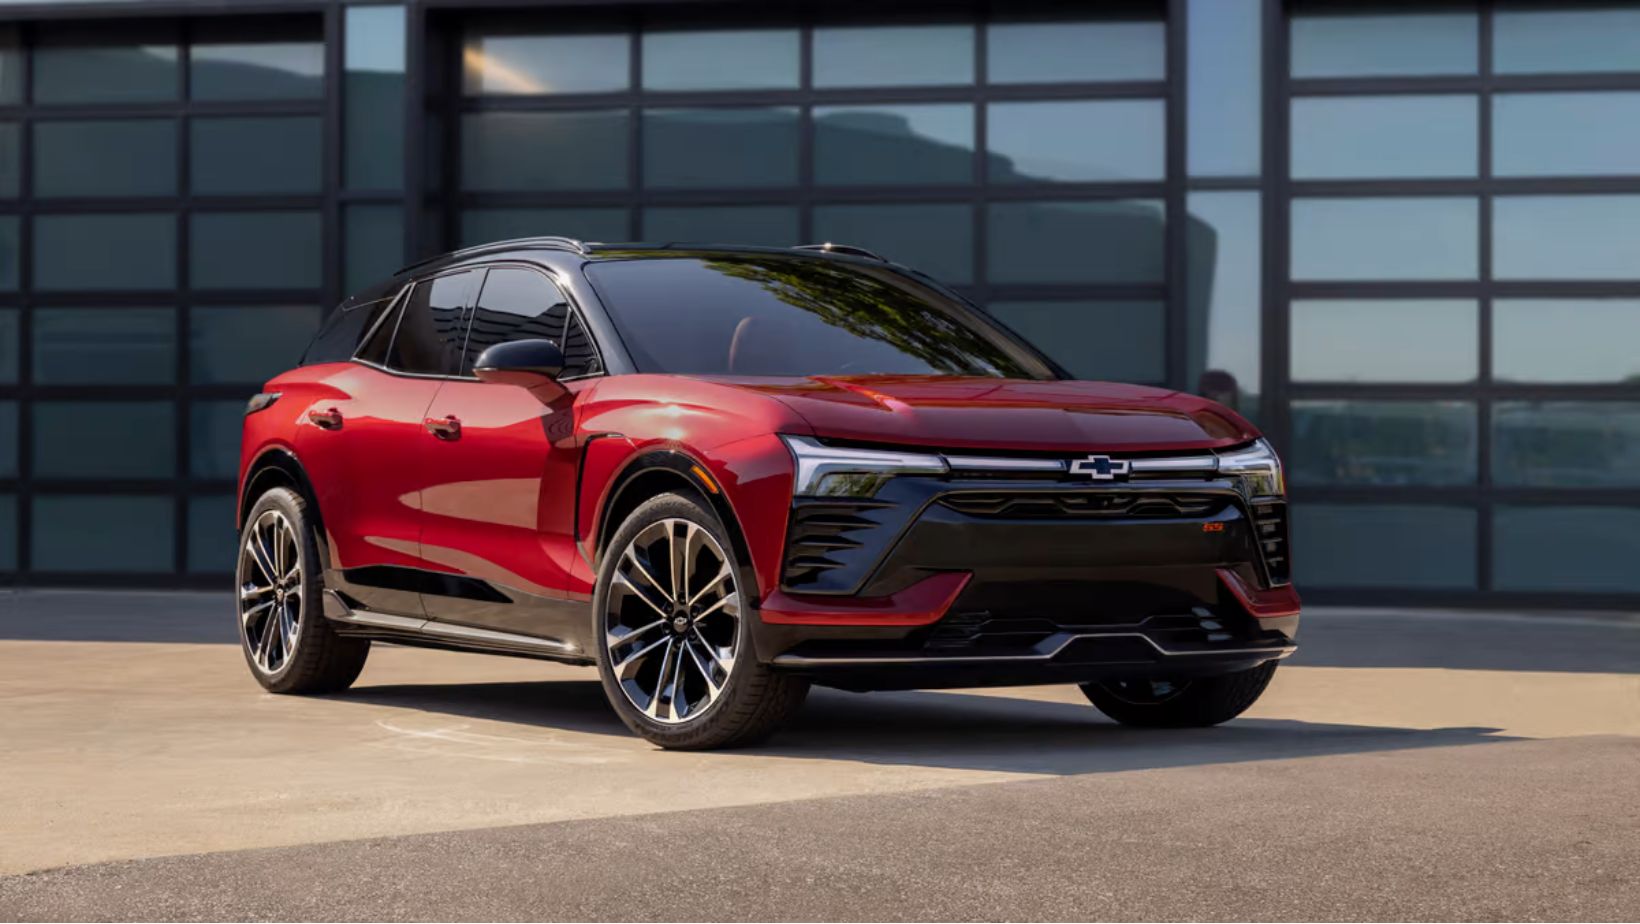 Chevrolet Blazer EV: Price, Launch Date, and Review